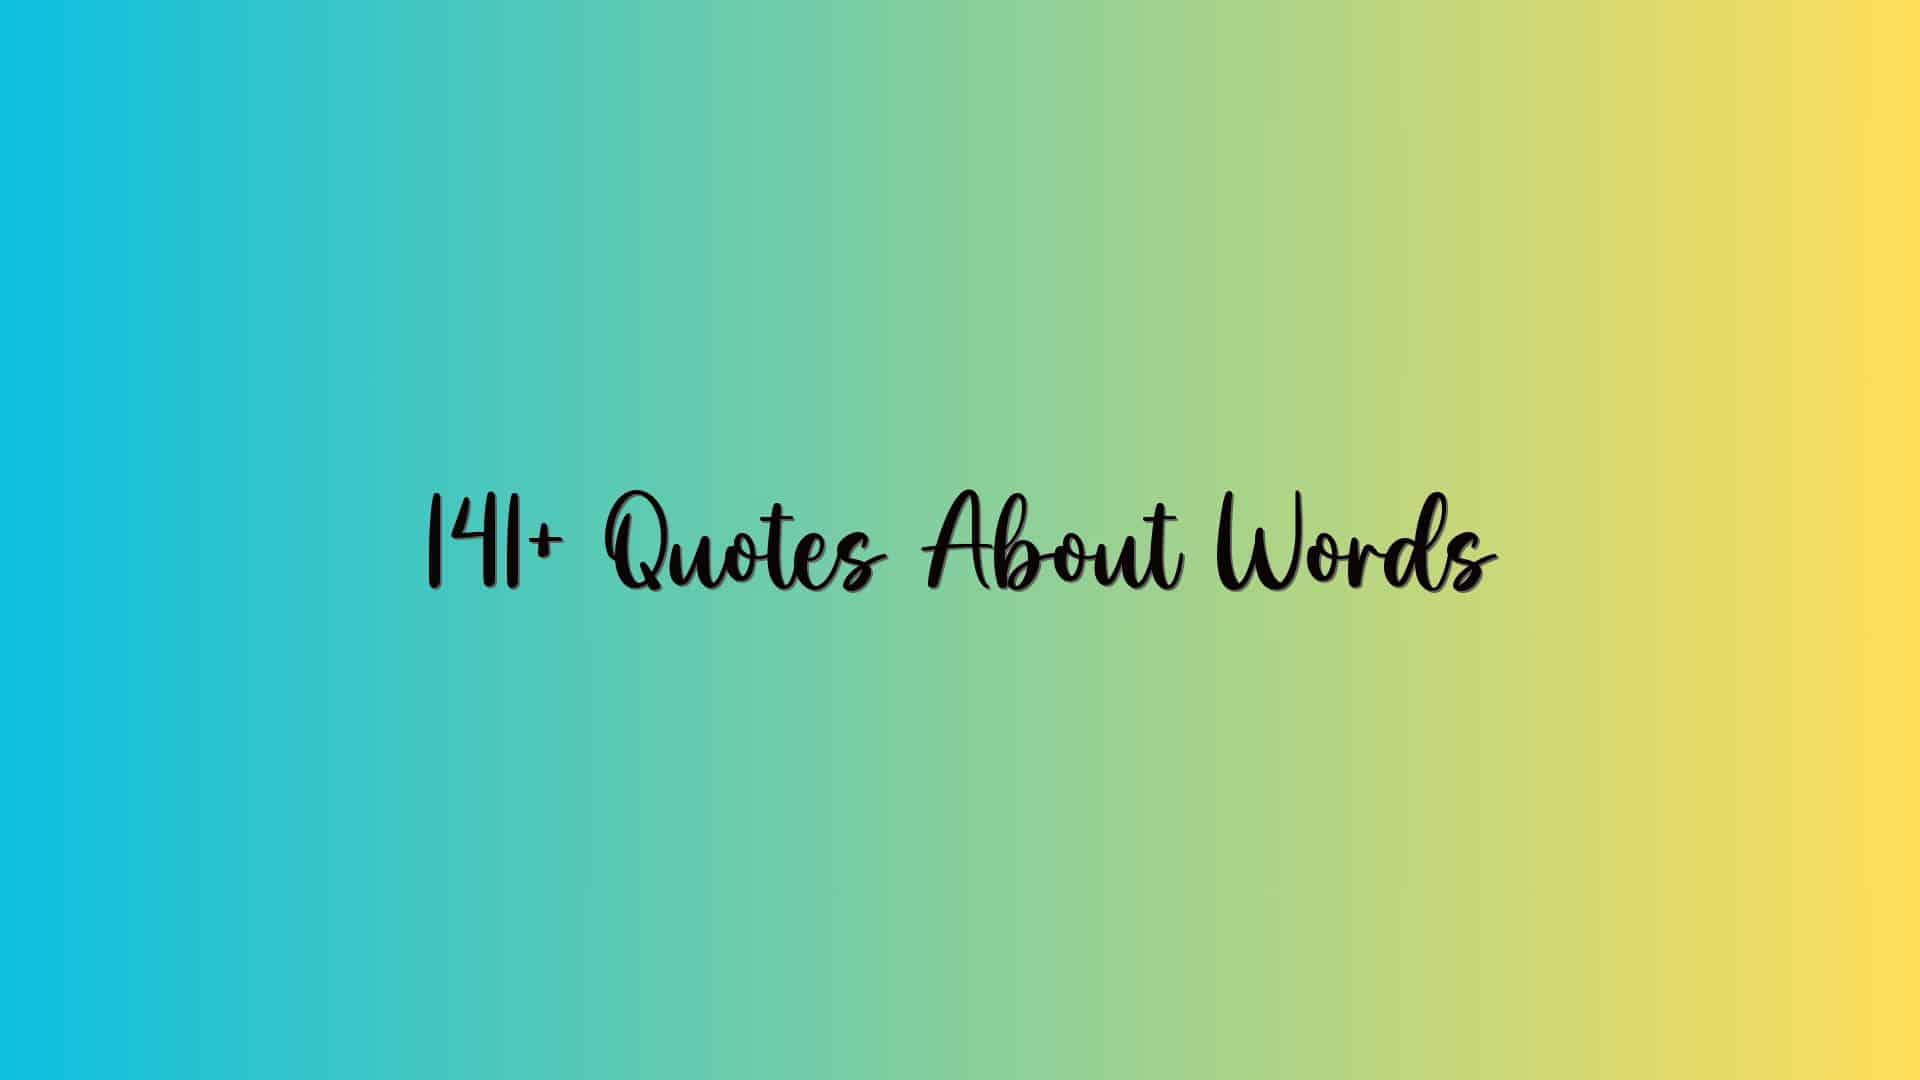 141+ Quotes About Words